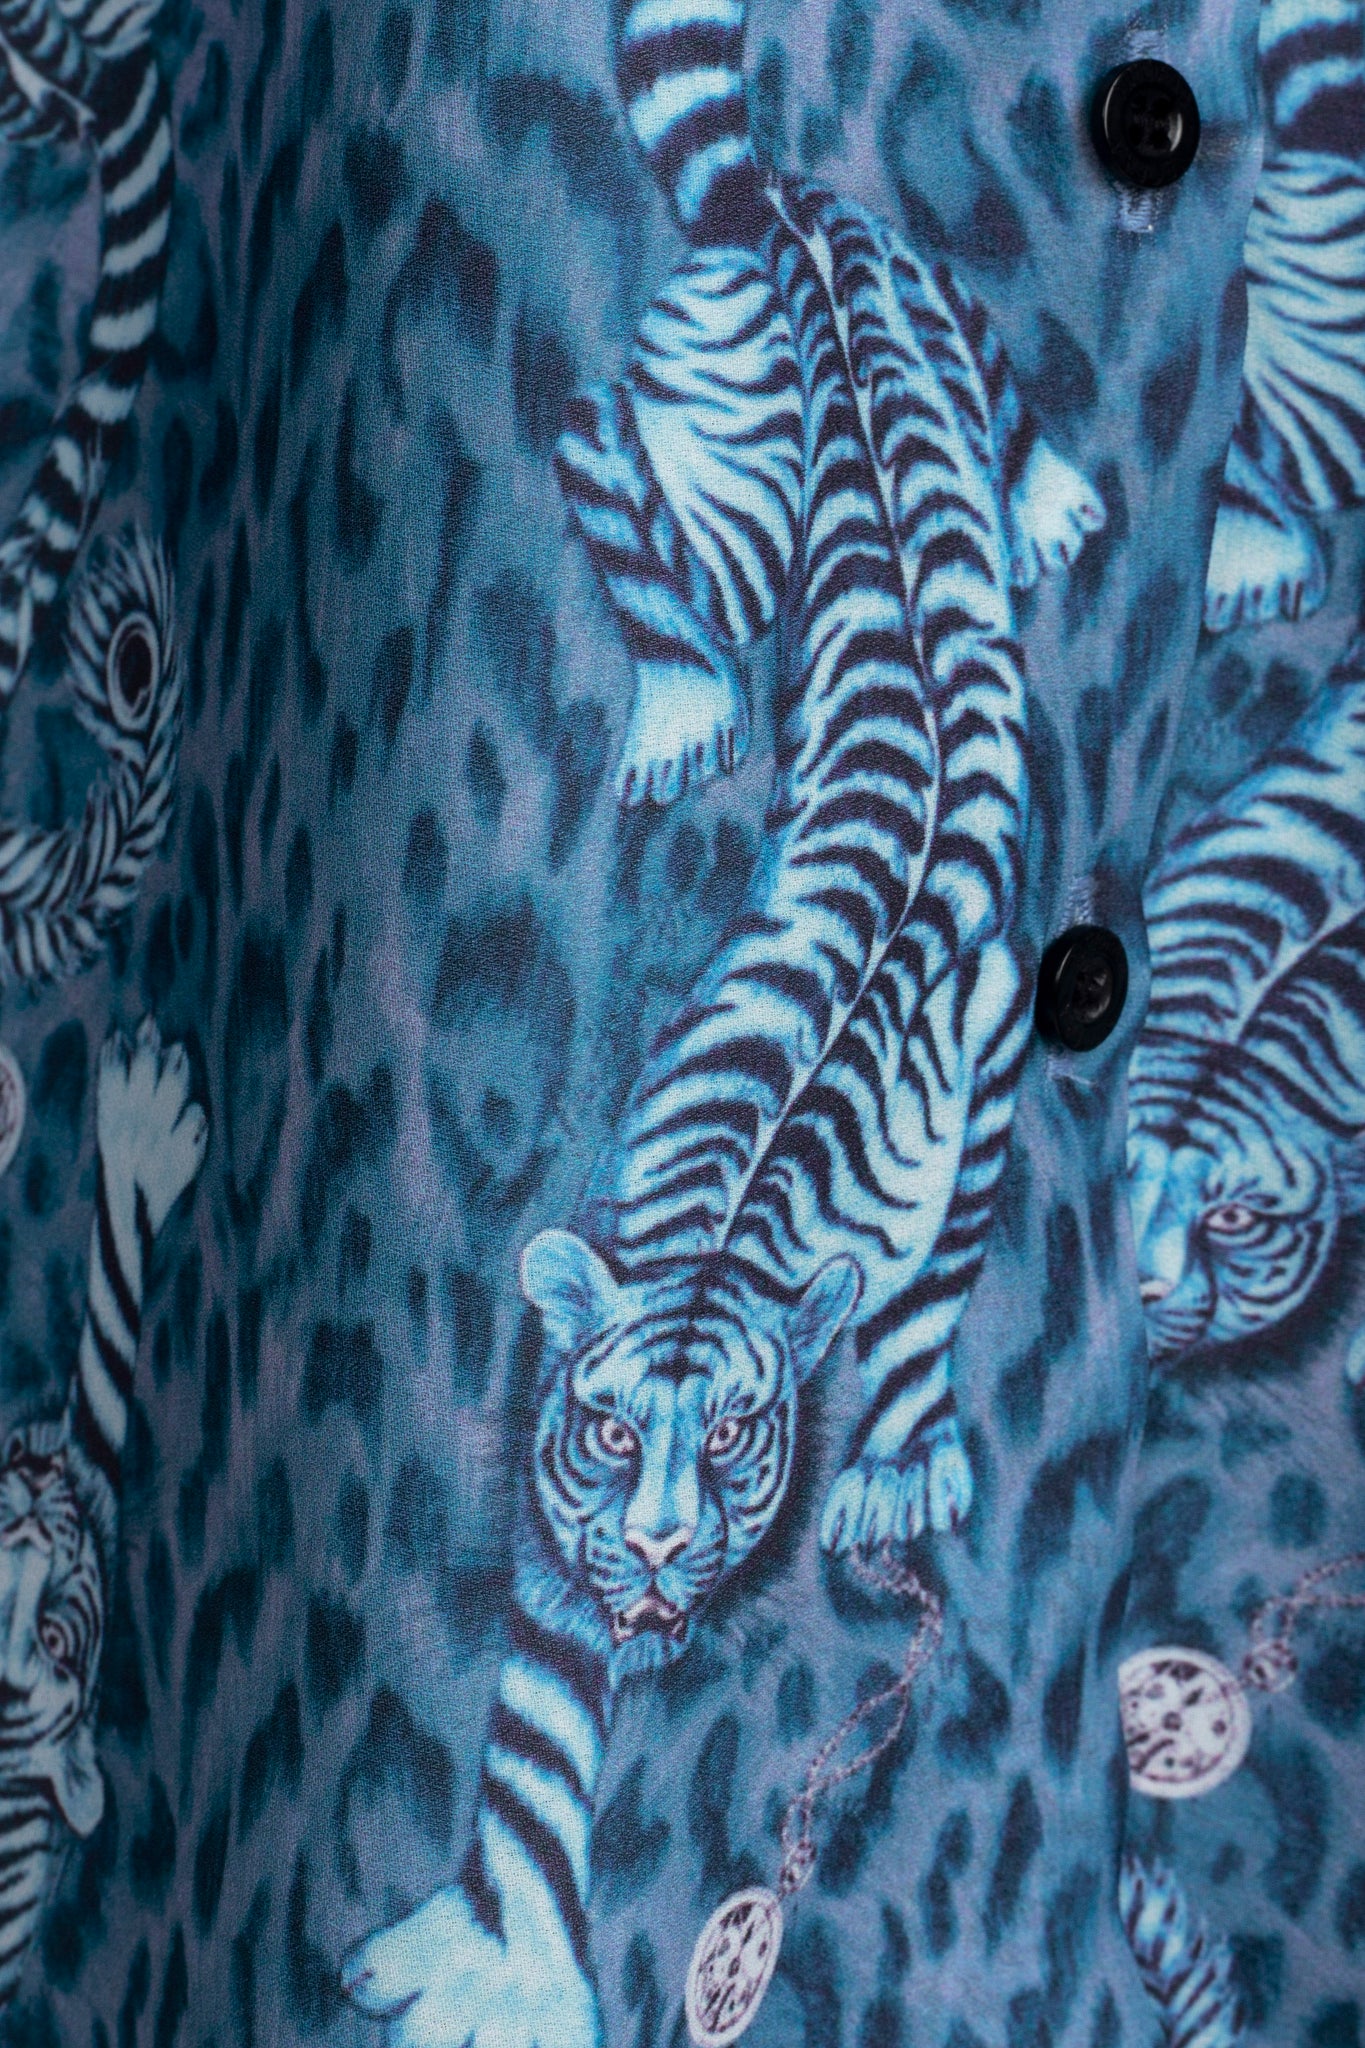 Attractive Tiger Print Shirt For Women